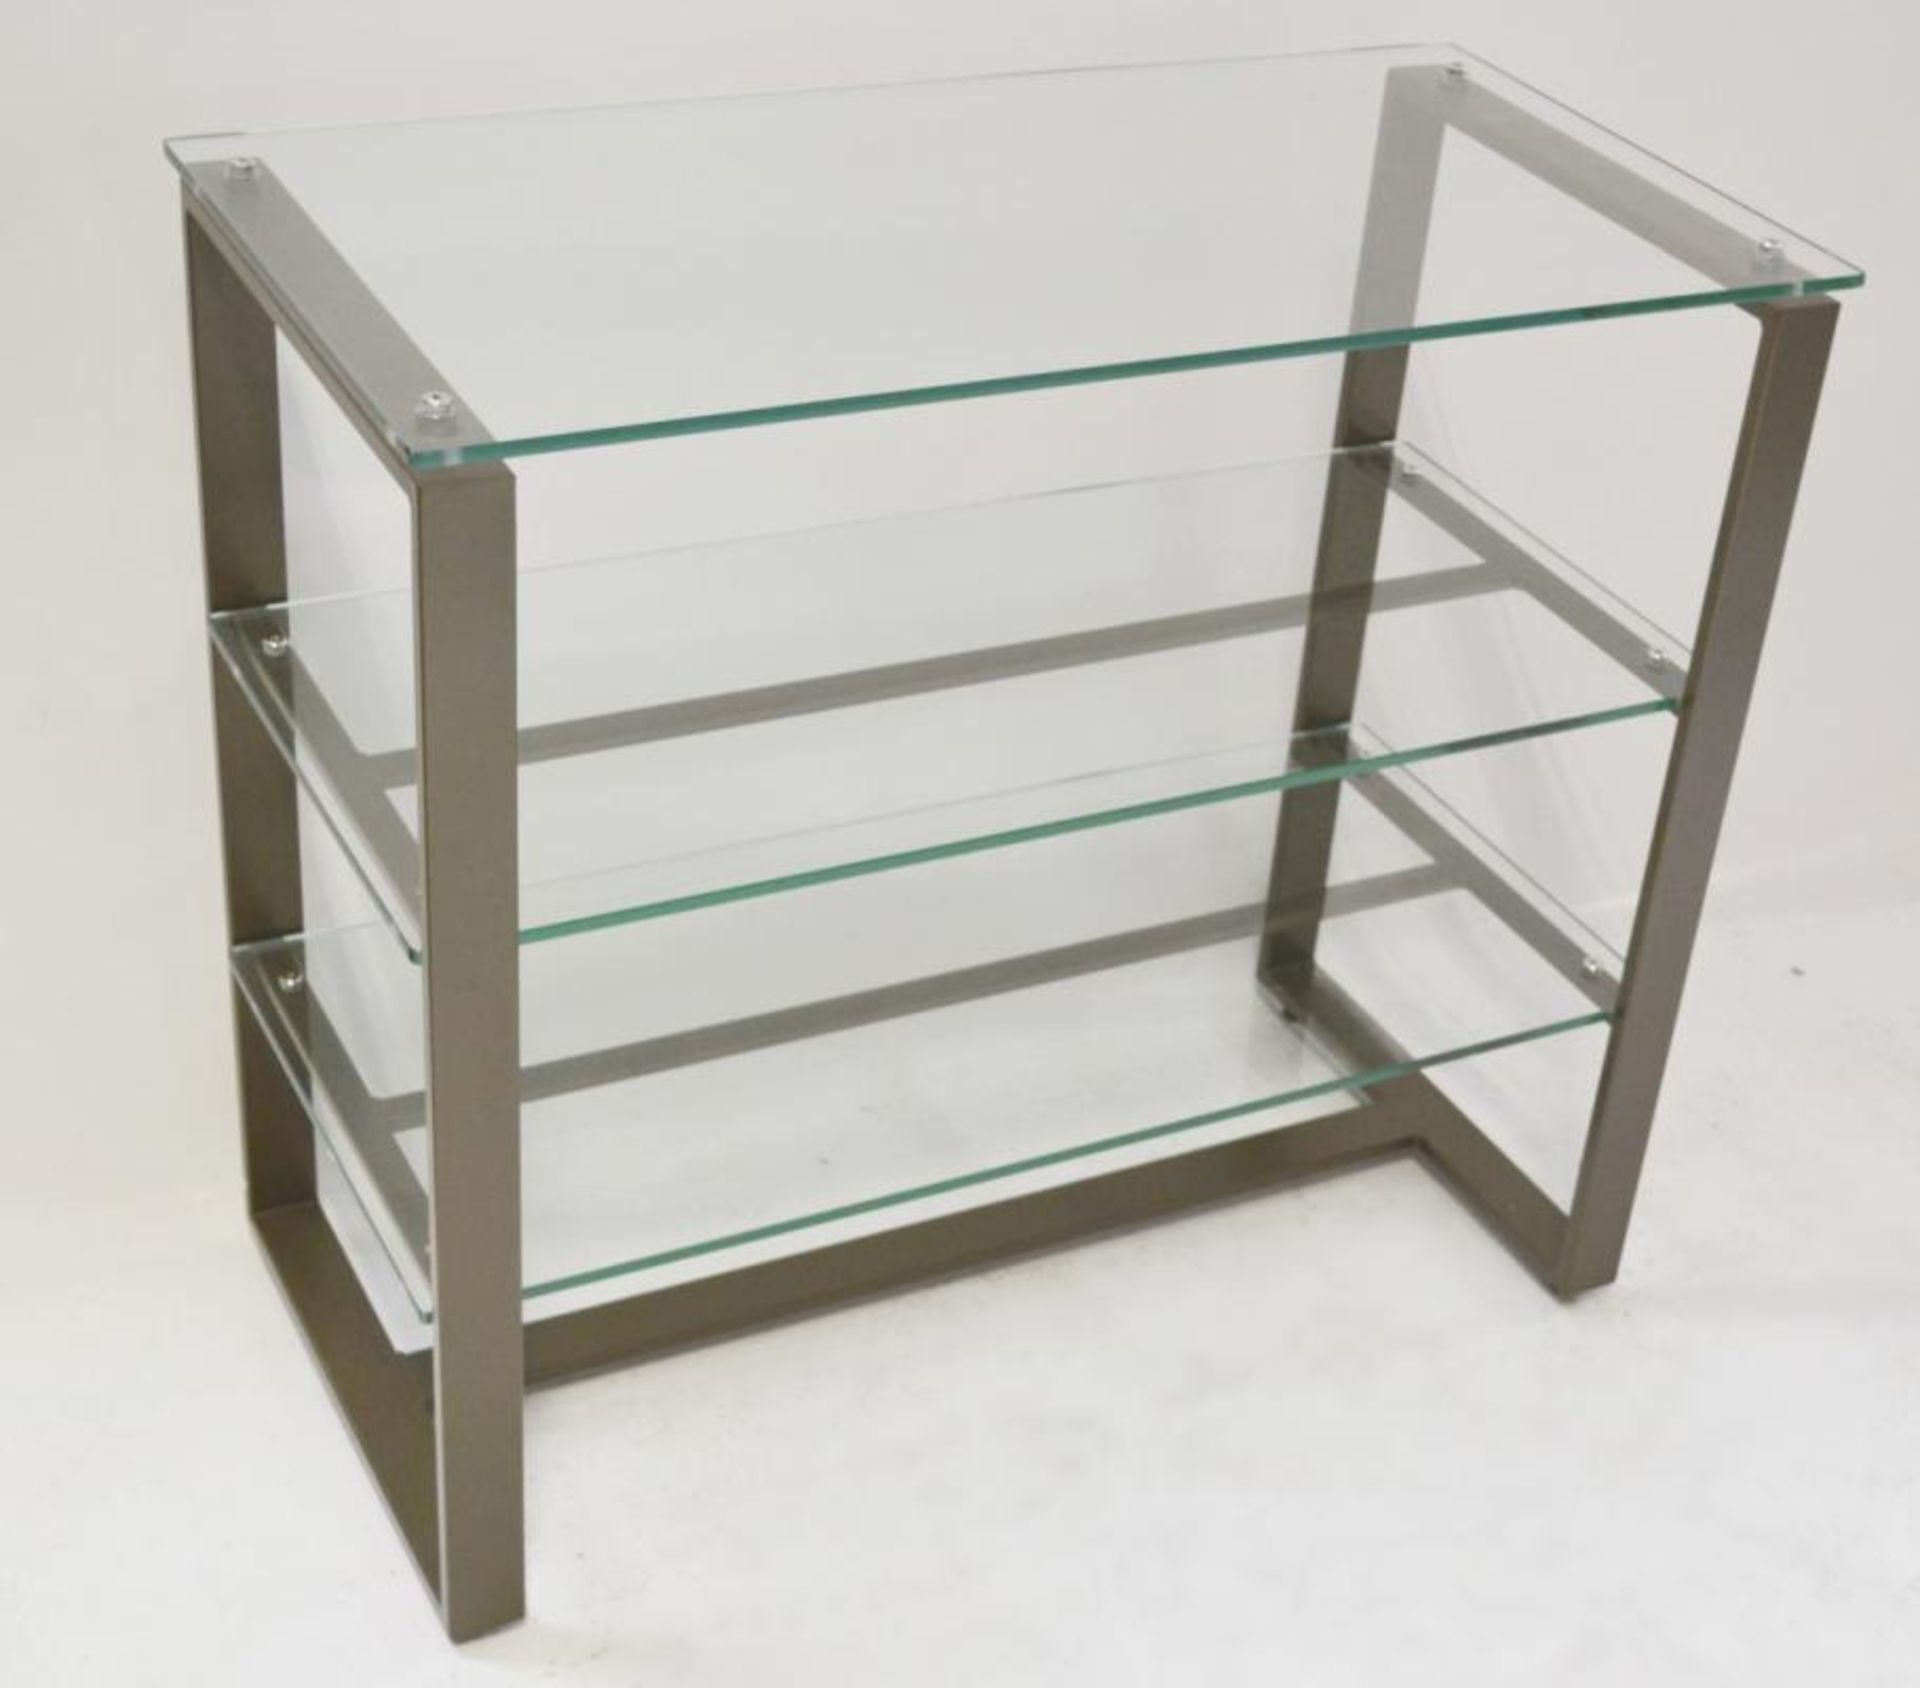 8 x Medium Contemporary Retail Glass Display Units With Sturdy Metal Frames and Three Shelves - - Image 7 of 9